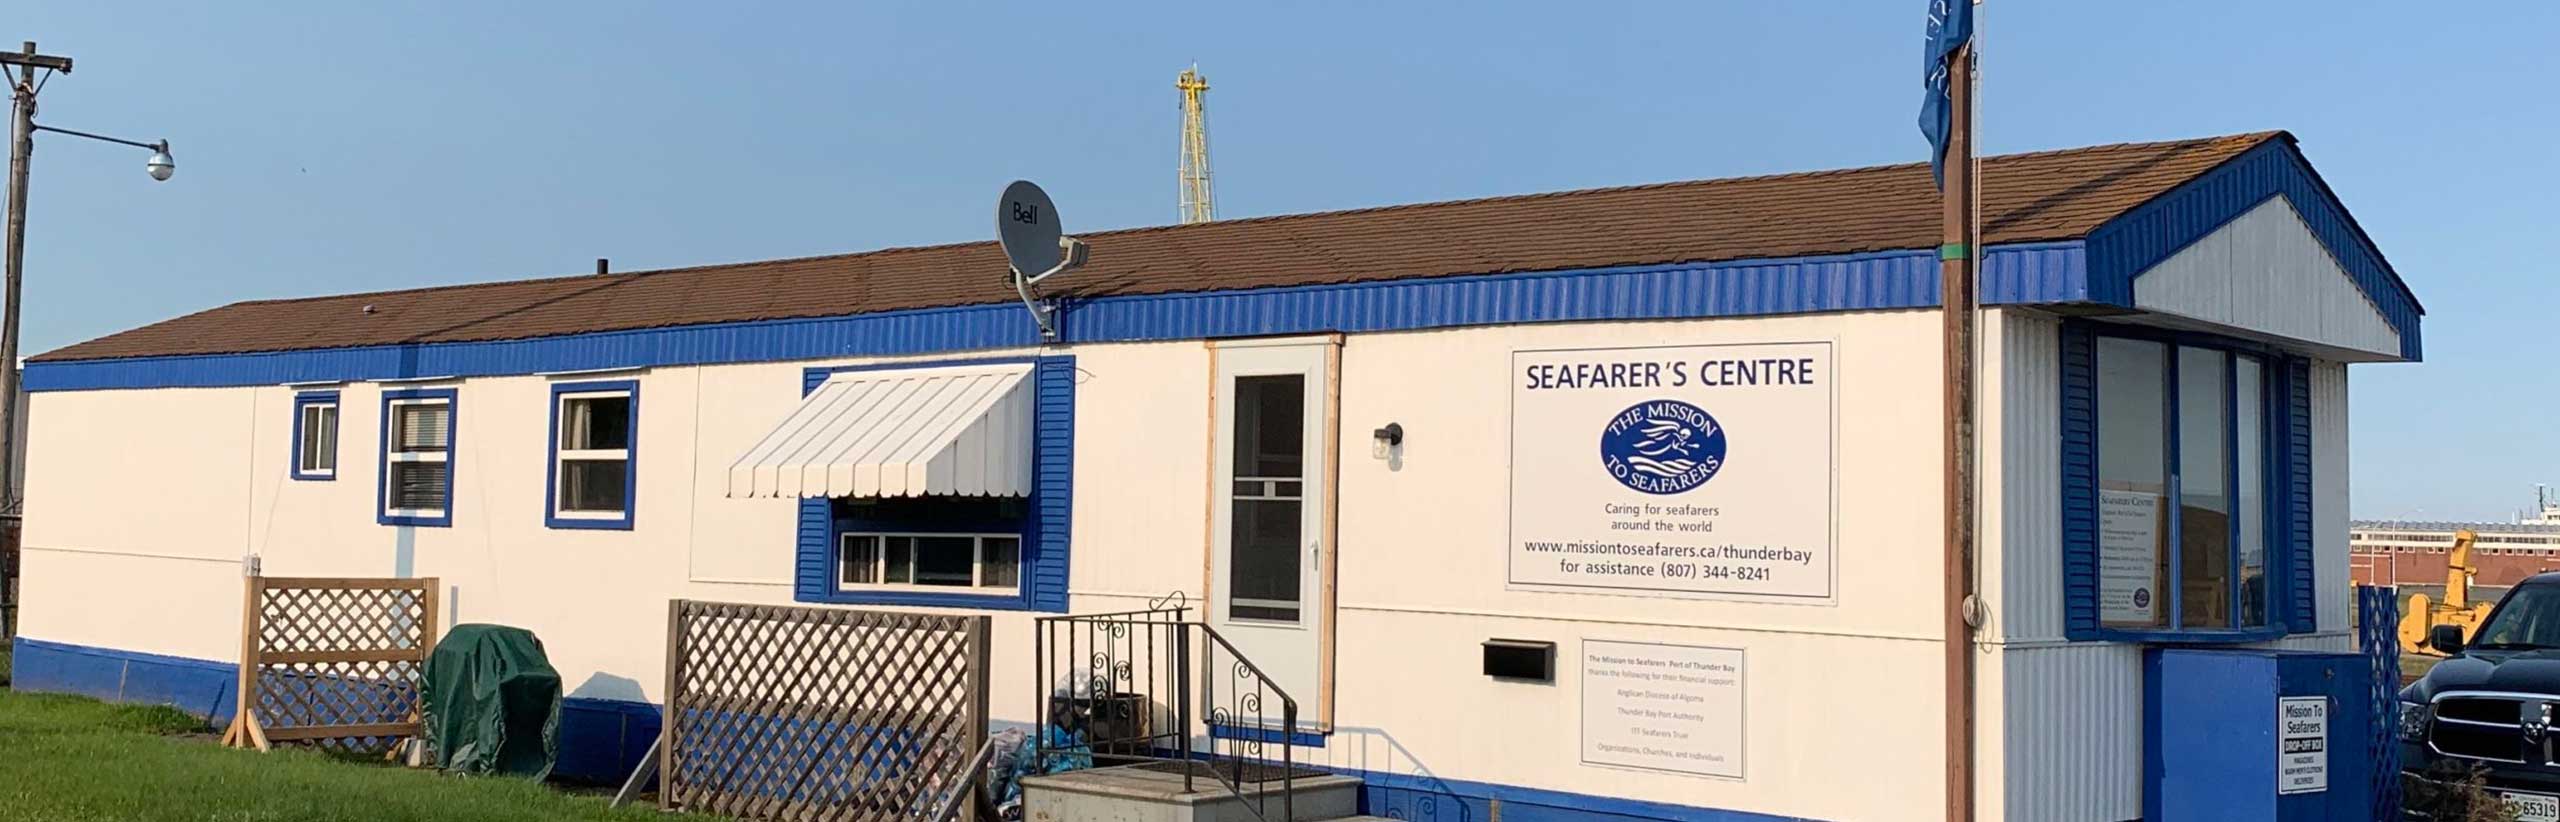 Seafarers-support-Canada-the-world-Mission-to-Seafarers-Port-of-Thunder-Bay